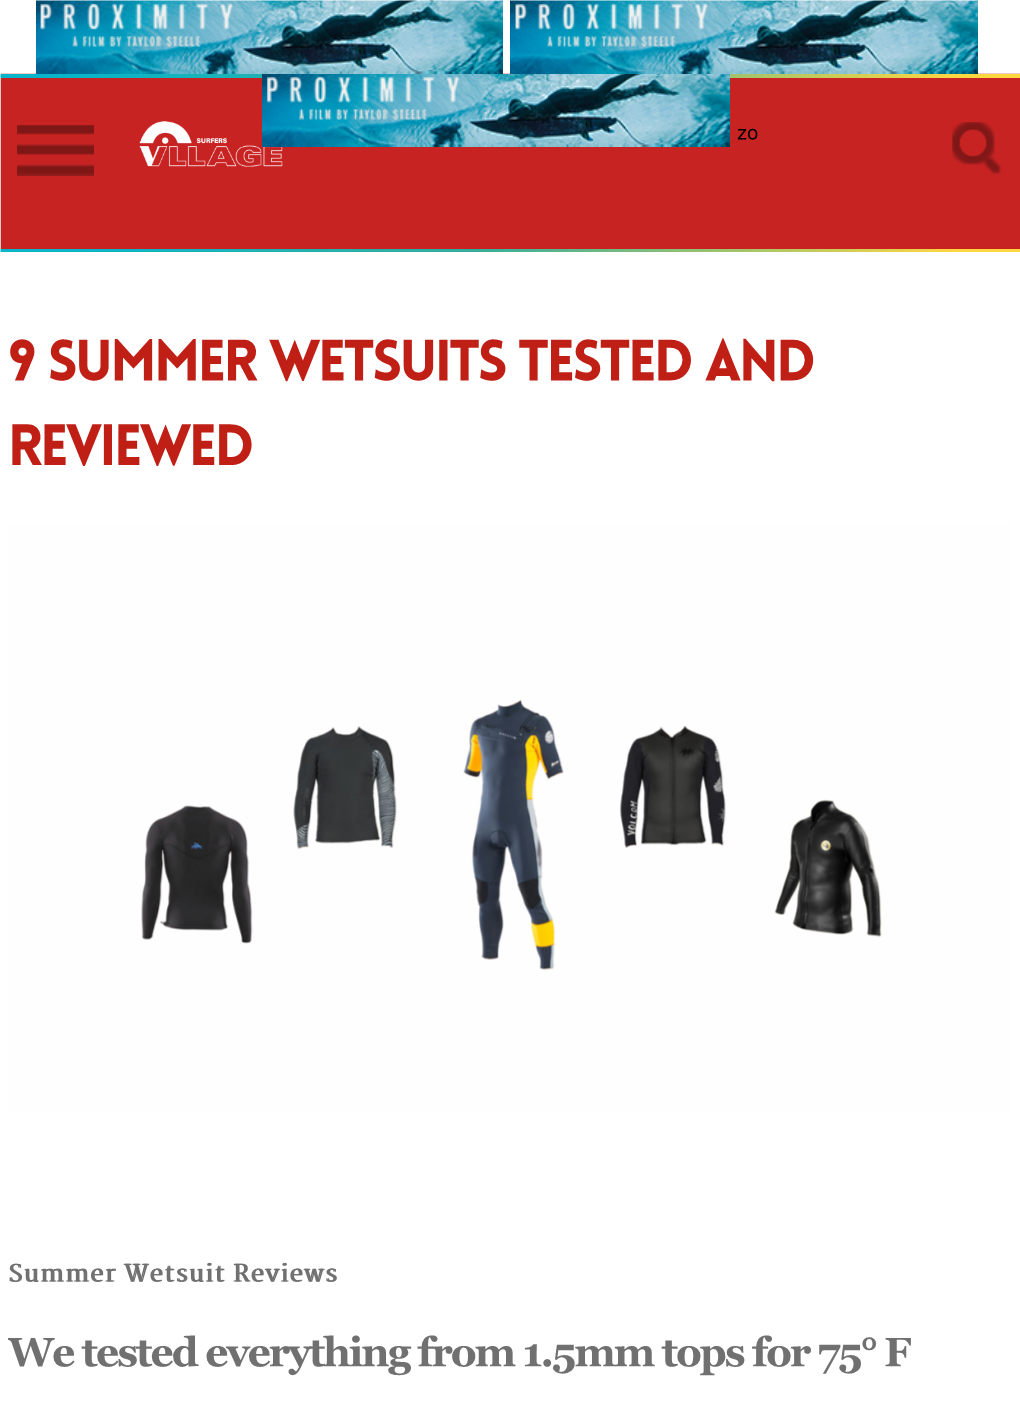 9 Summer Wetsuits Tested and Reviewed